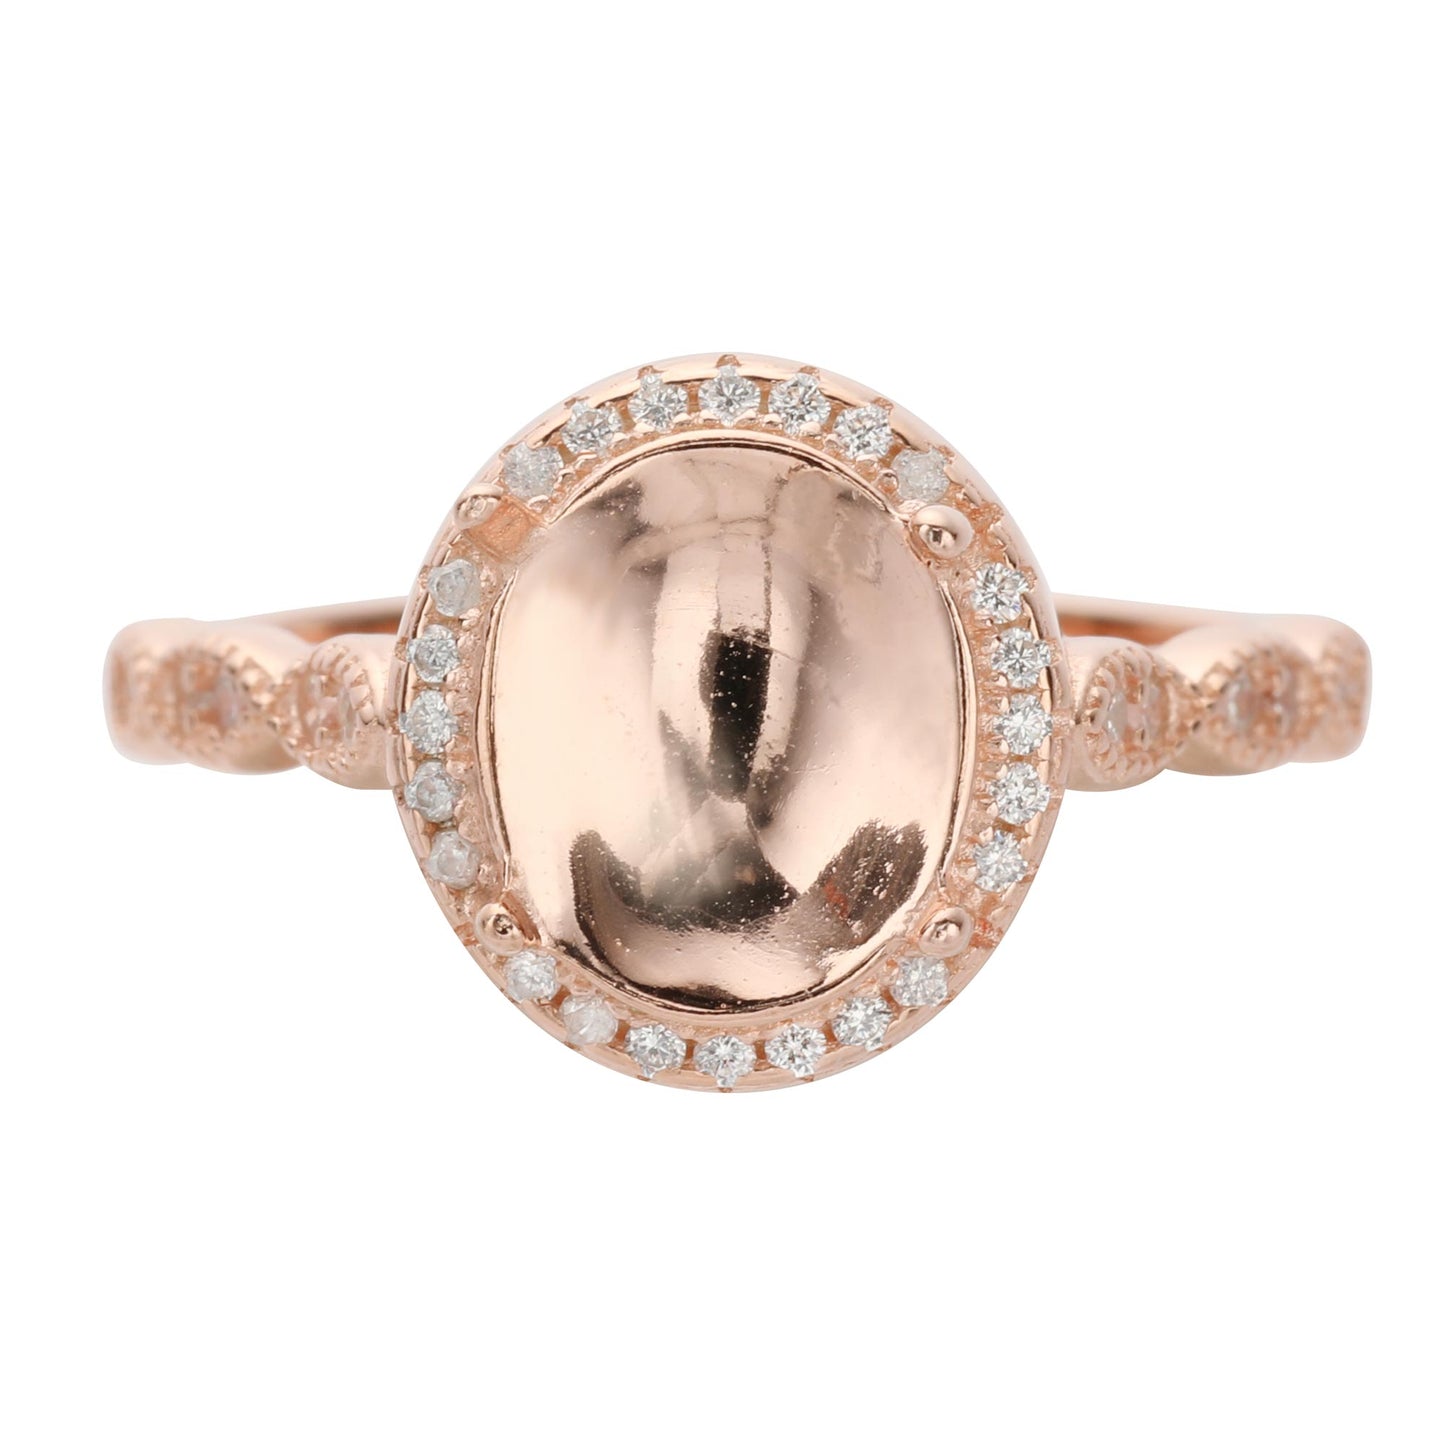 A rose gold halo art deco band style semi mount with a curved solid base to hold ashes.